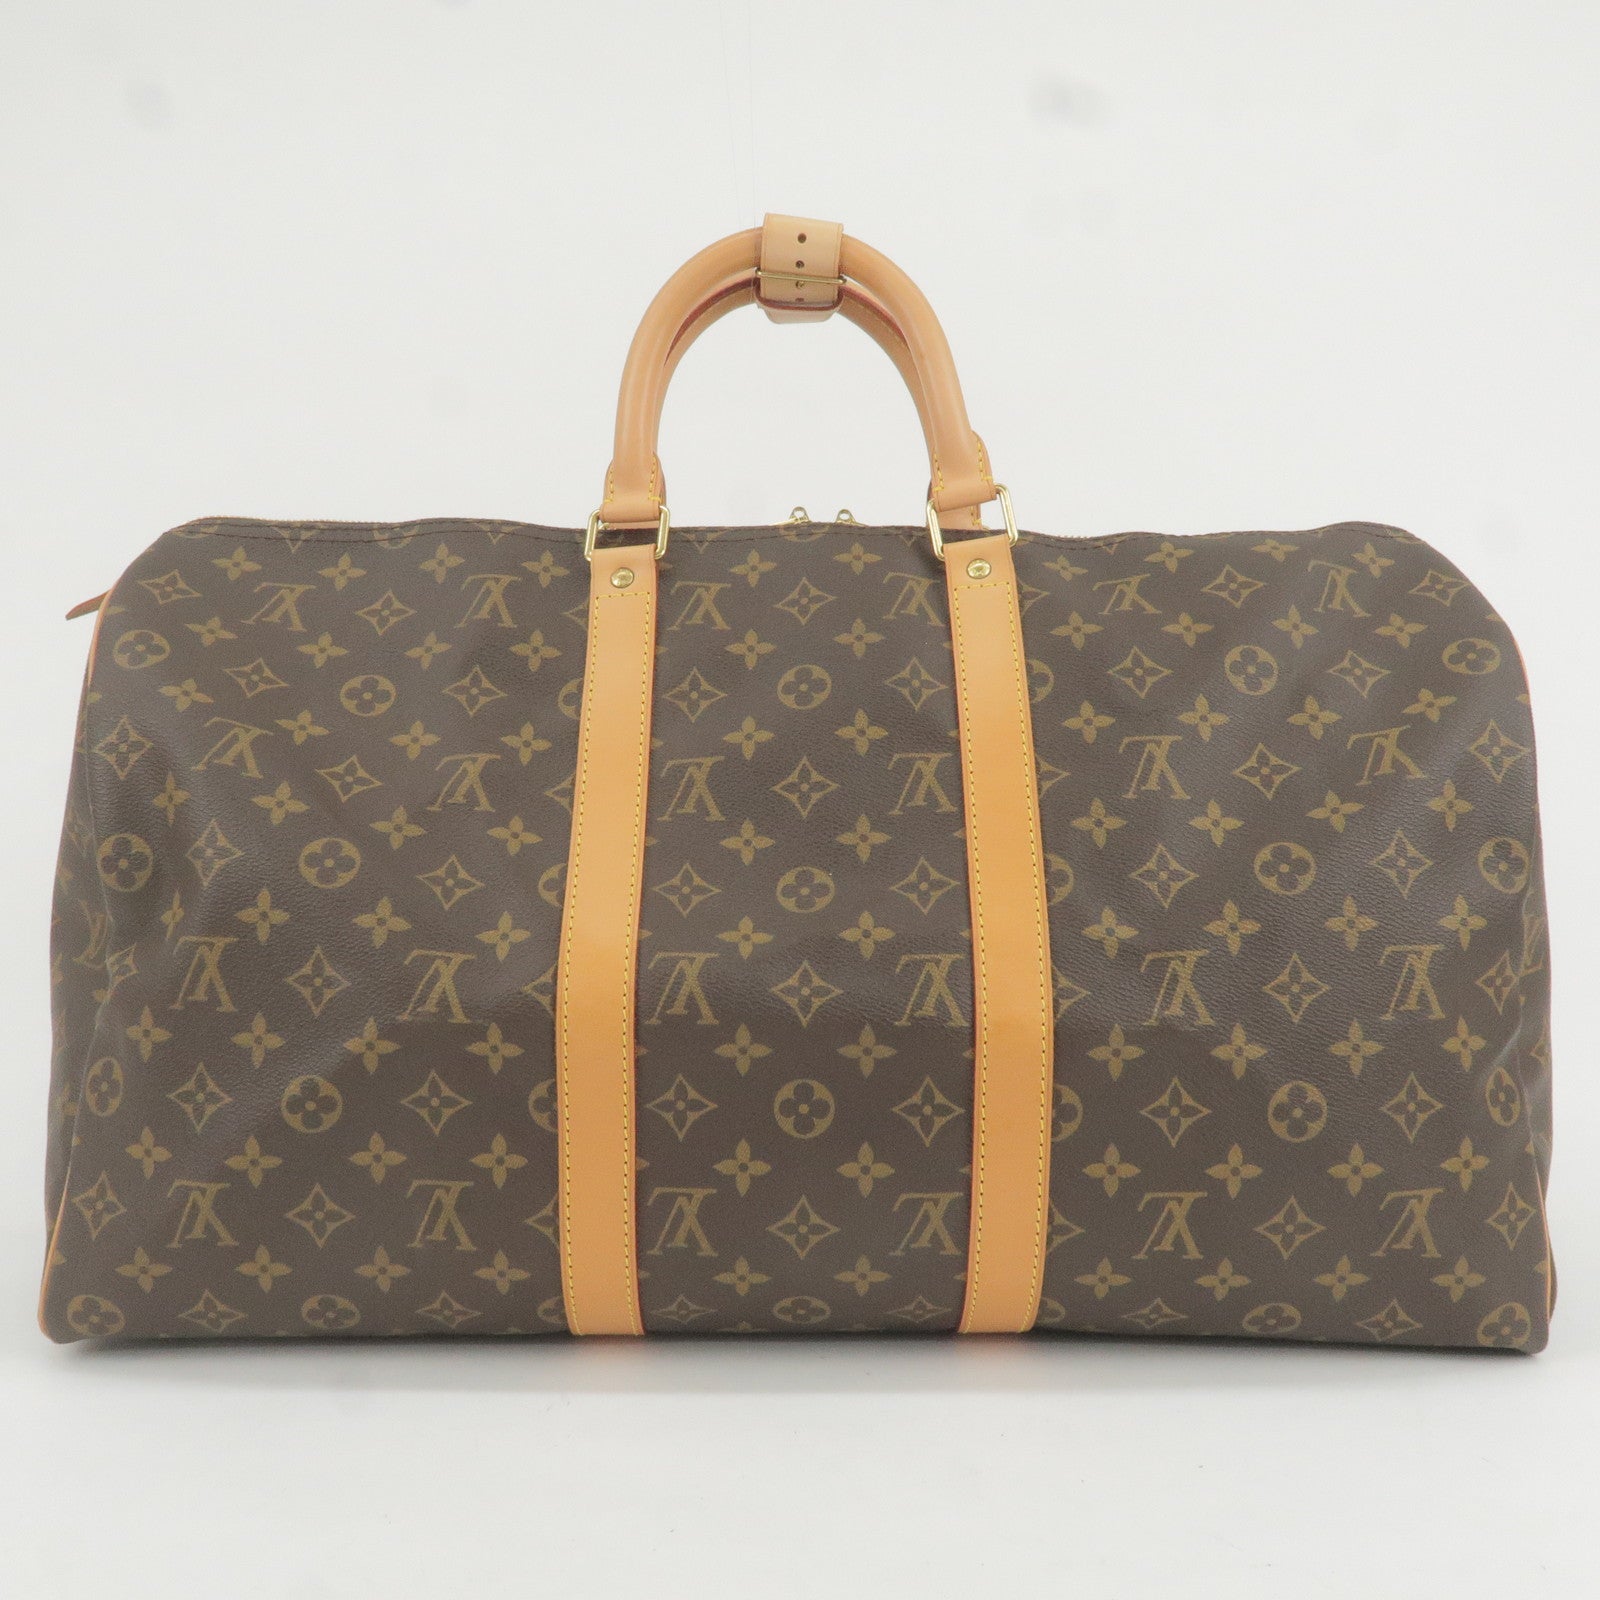 Louis Vuitton's Rolling Luggage Comes In Soft Version